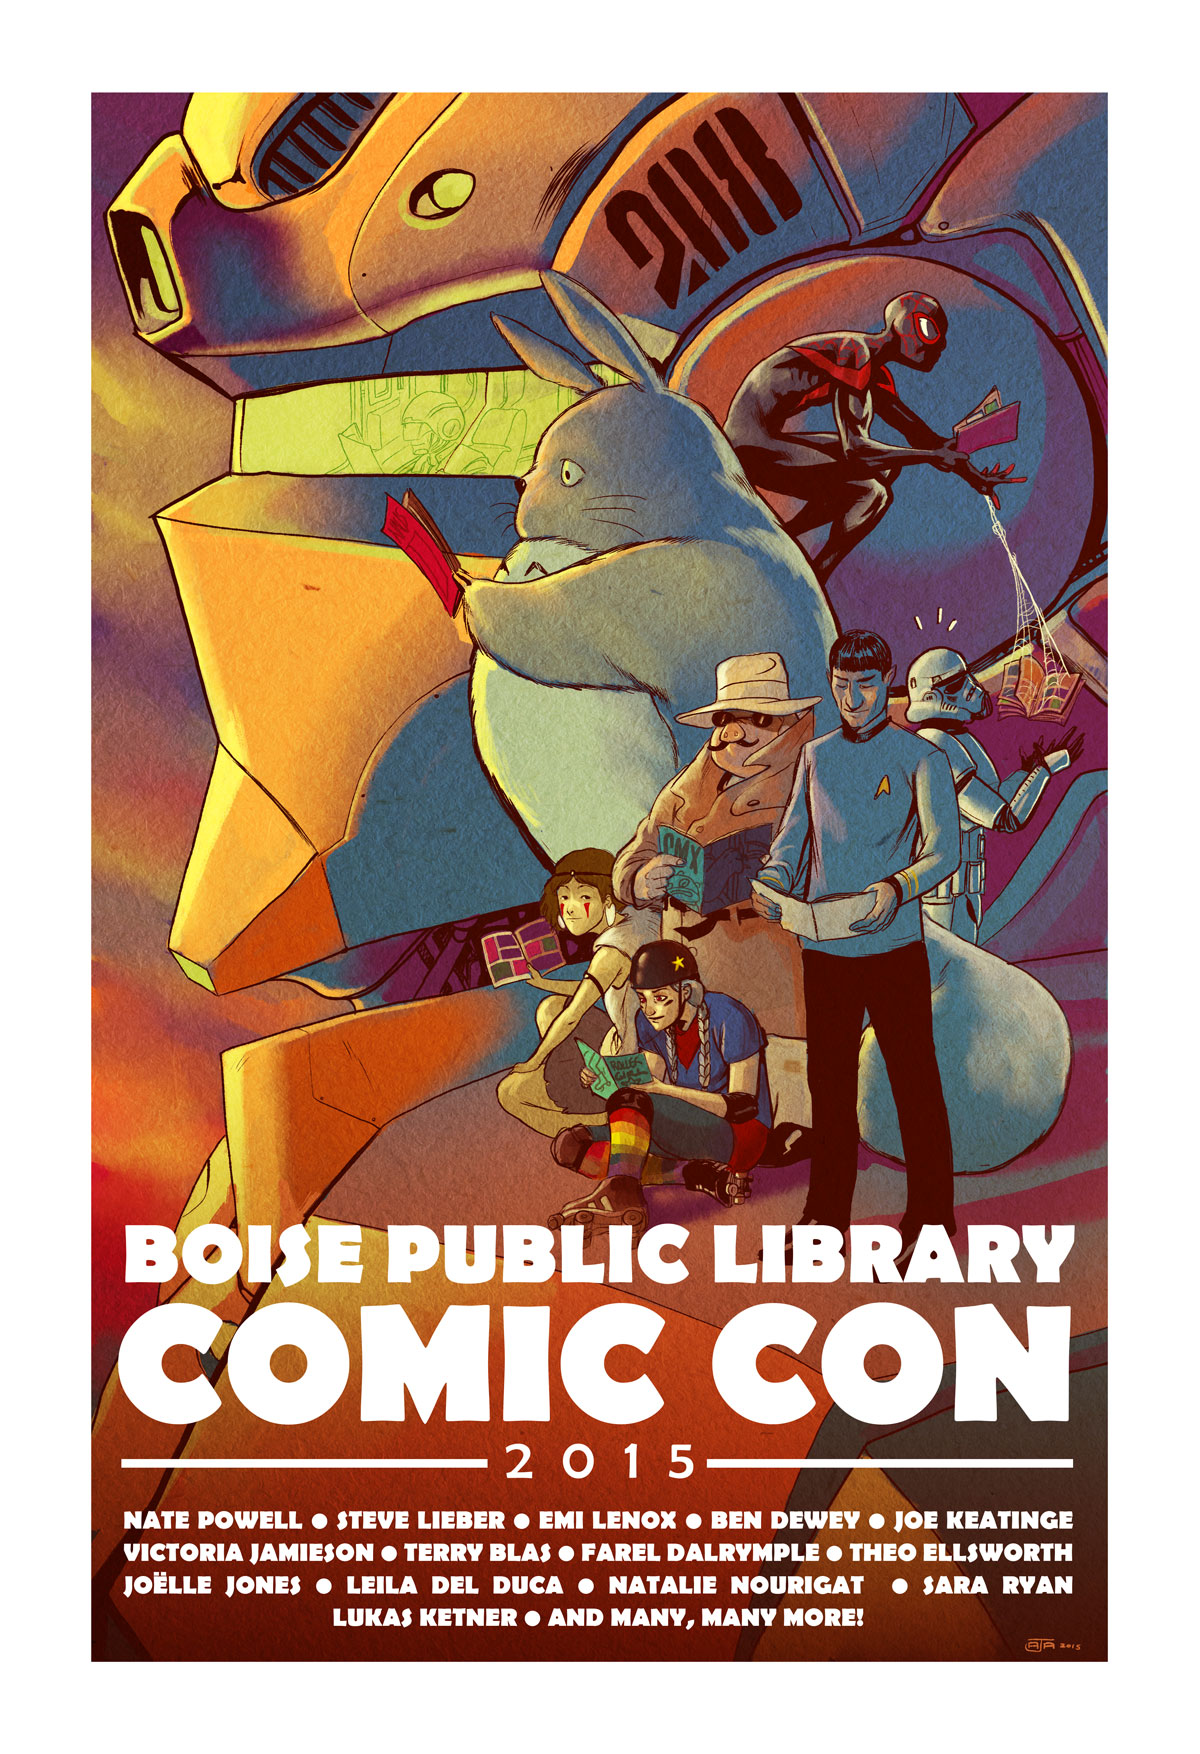 Boise Library Comic Con August 29th!